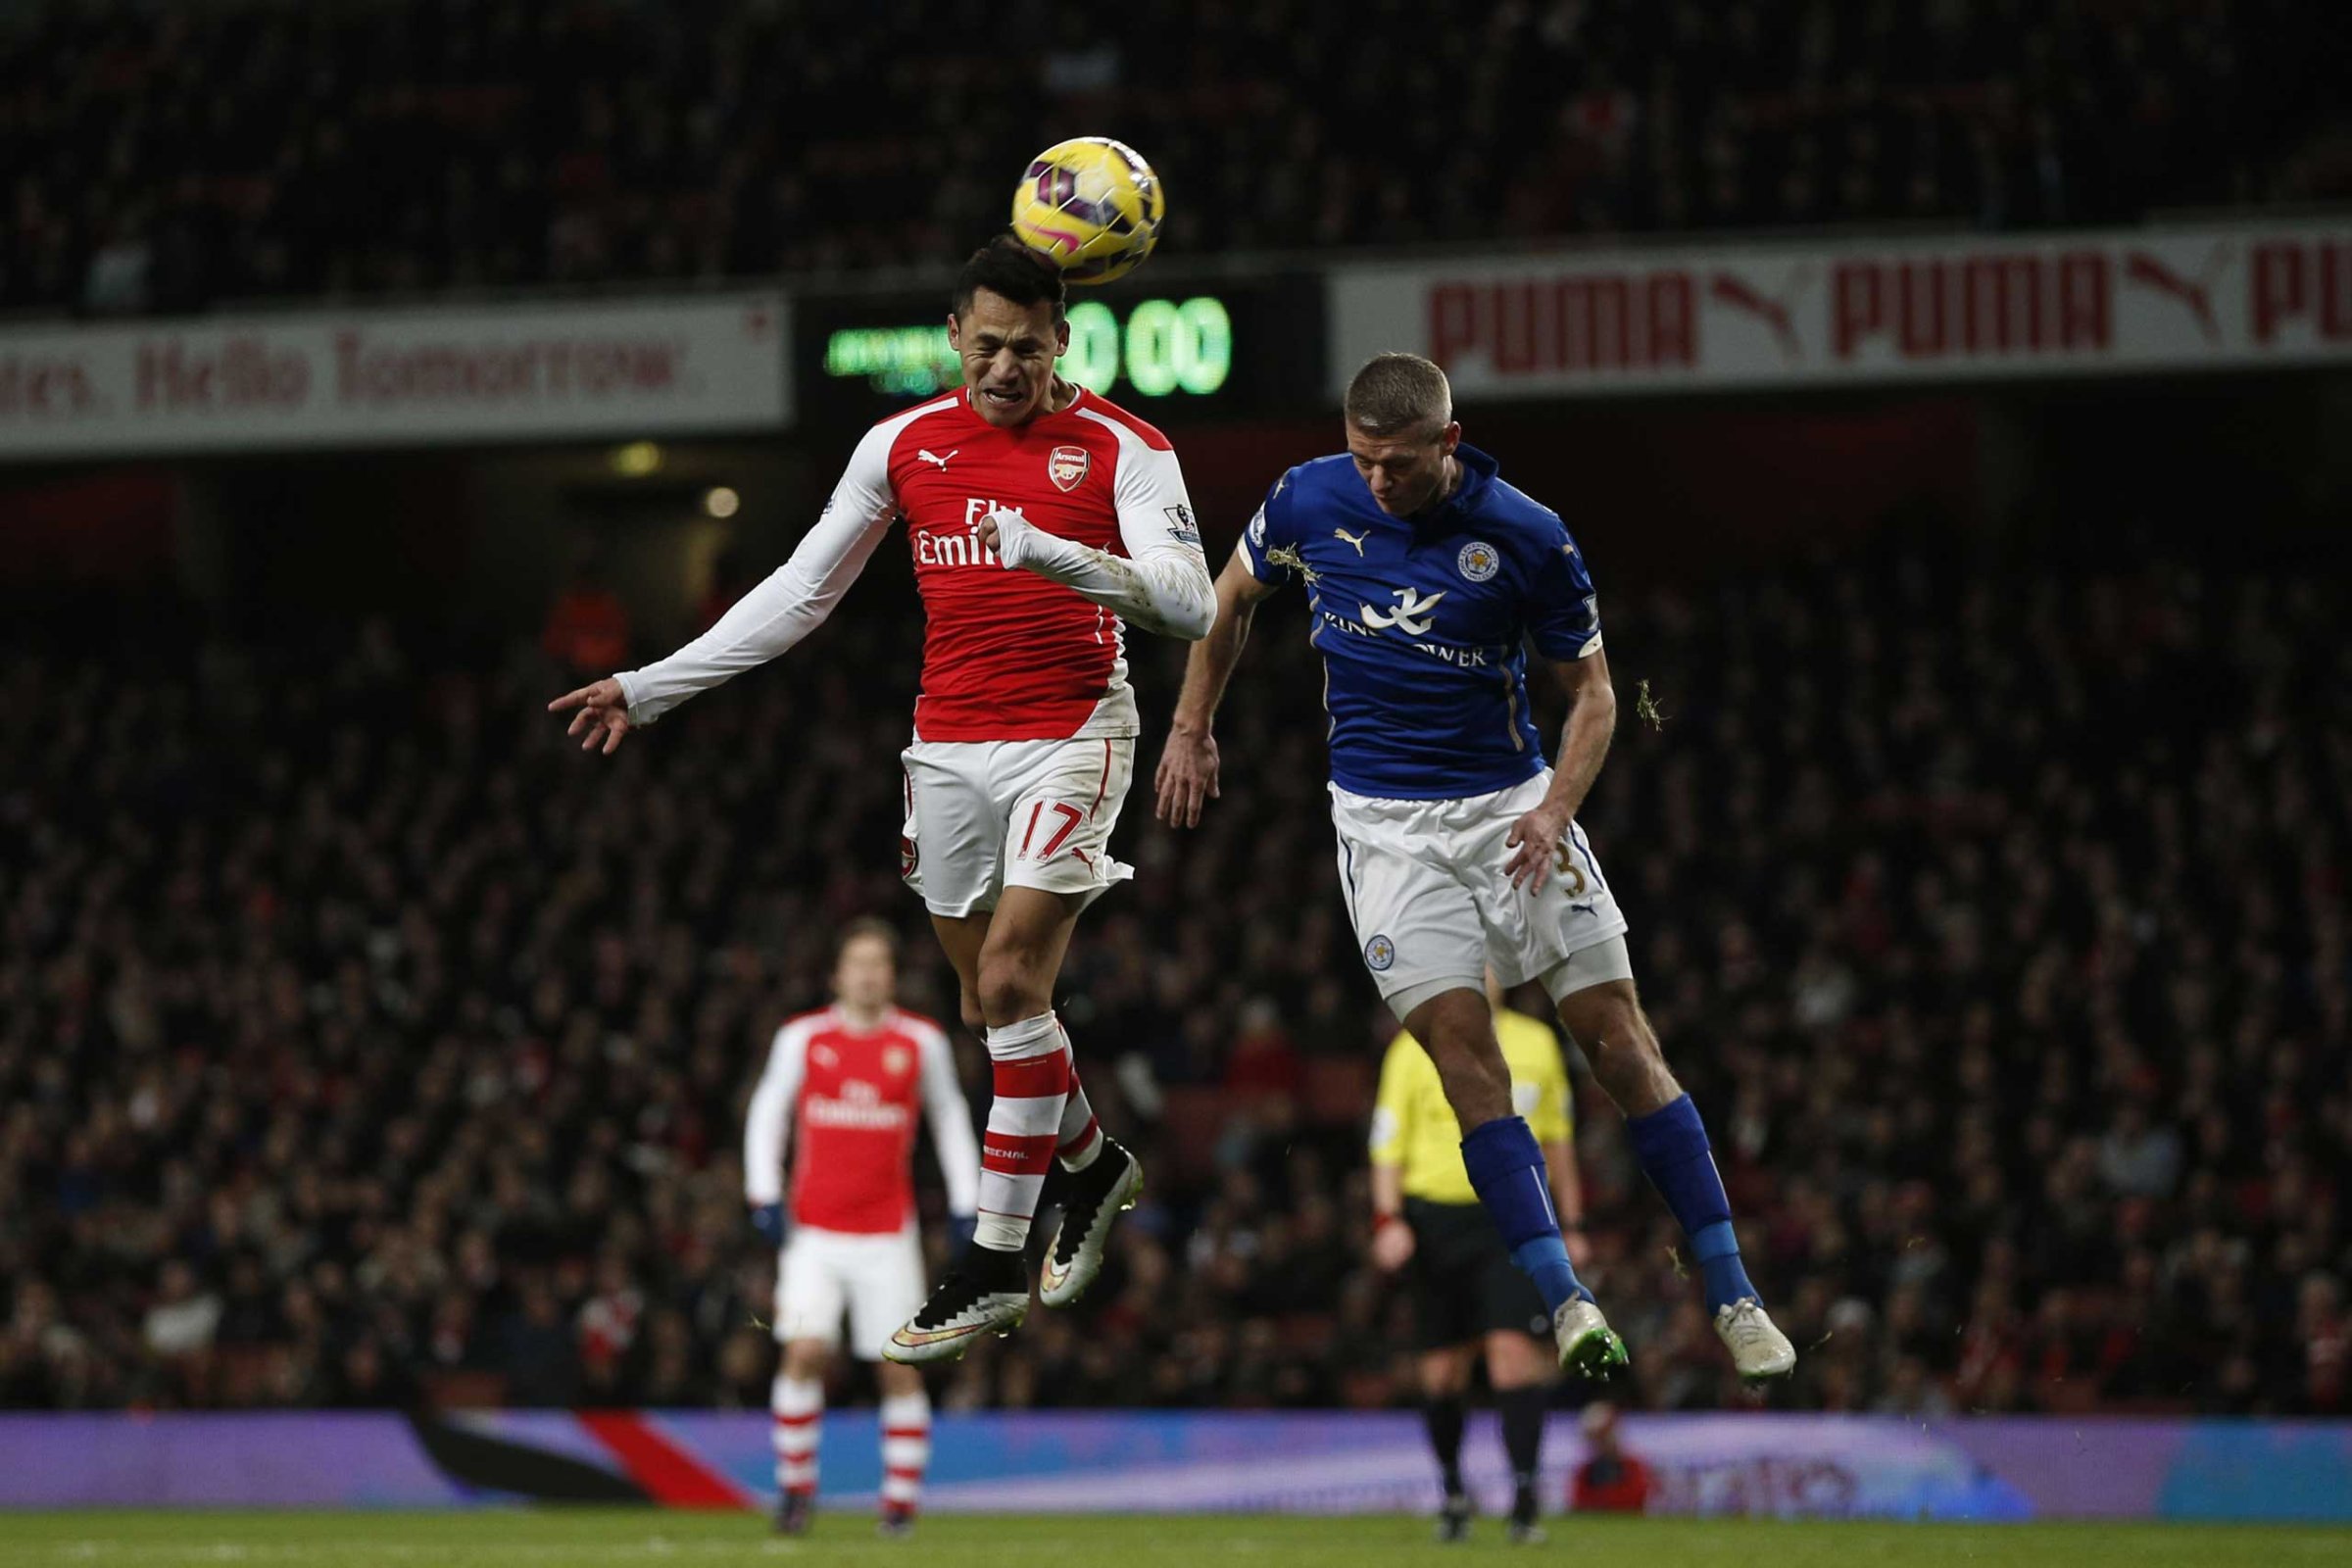 Arsenal's Chilean striker Alexis Sanchez heads the ball ahead of Leicester City's English defender Paul Konchesky during the English Premier League football match between Arsenal and and Leicester City at the Emirates Stadium in London on Feb. 10, 2015.